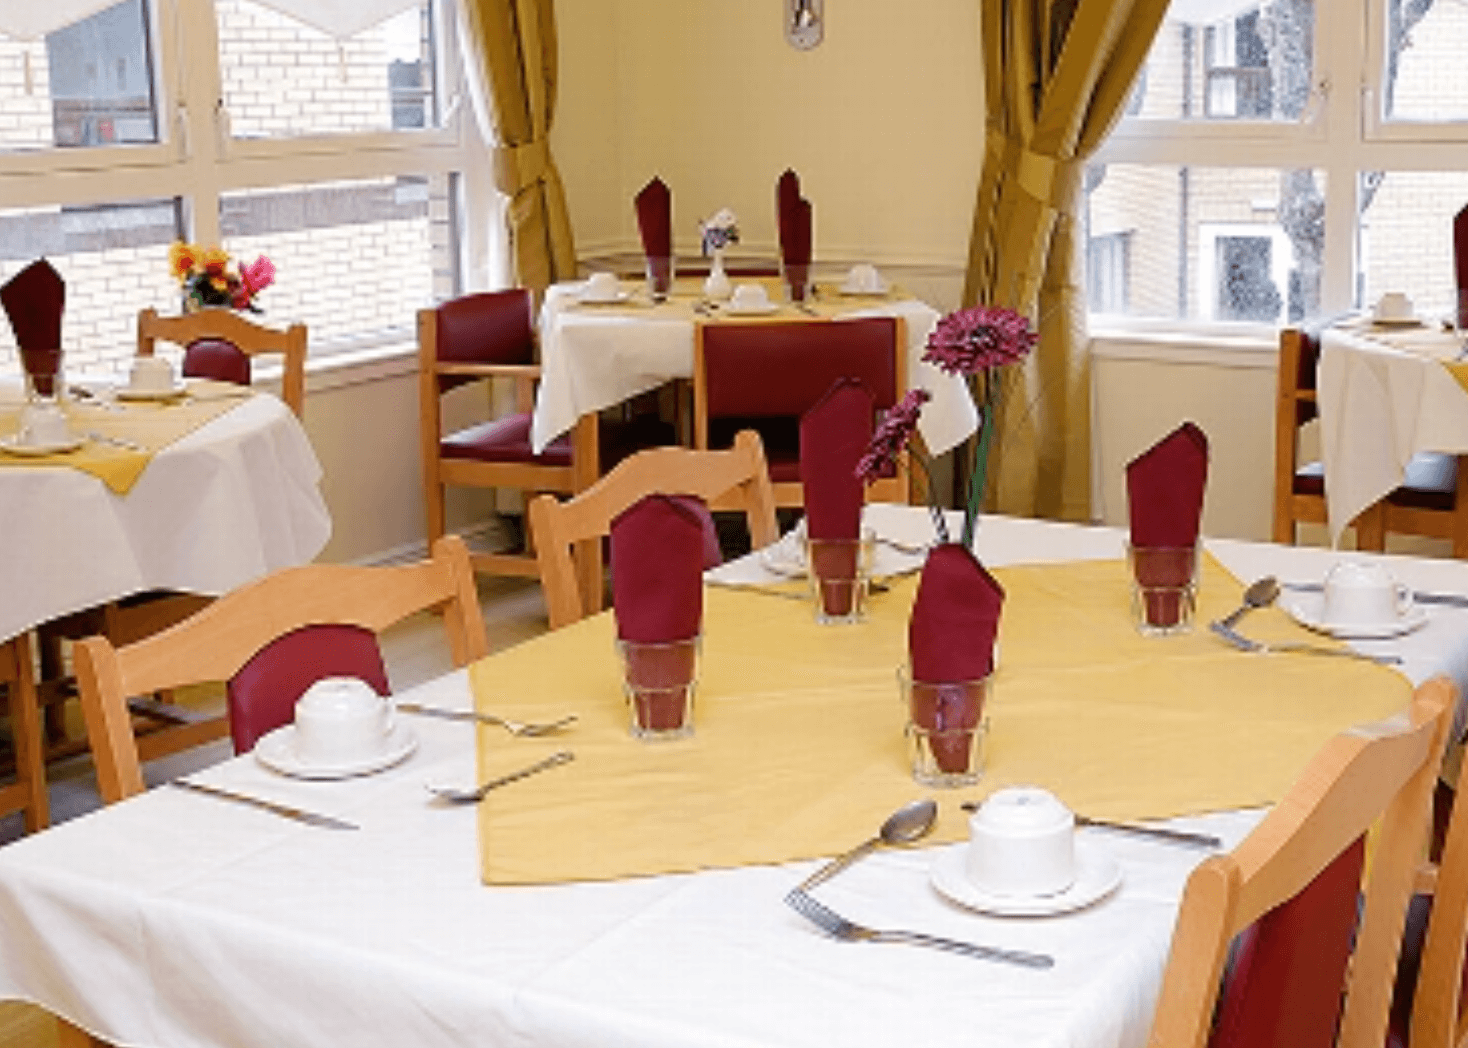 Dining room of Deanfield Care Home in Glasgow, Scotland